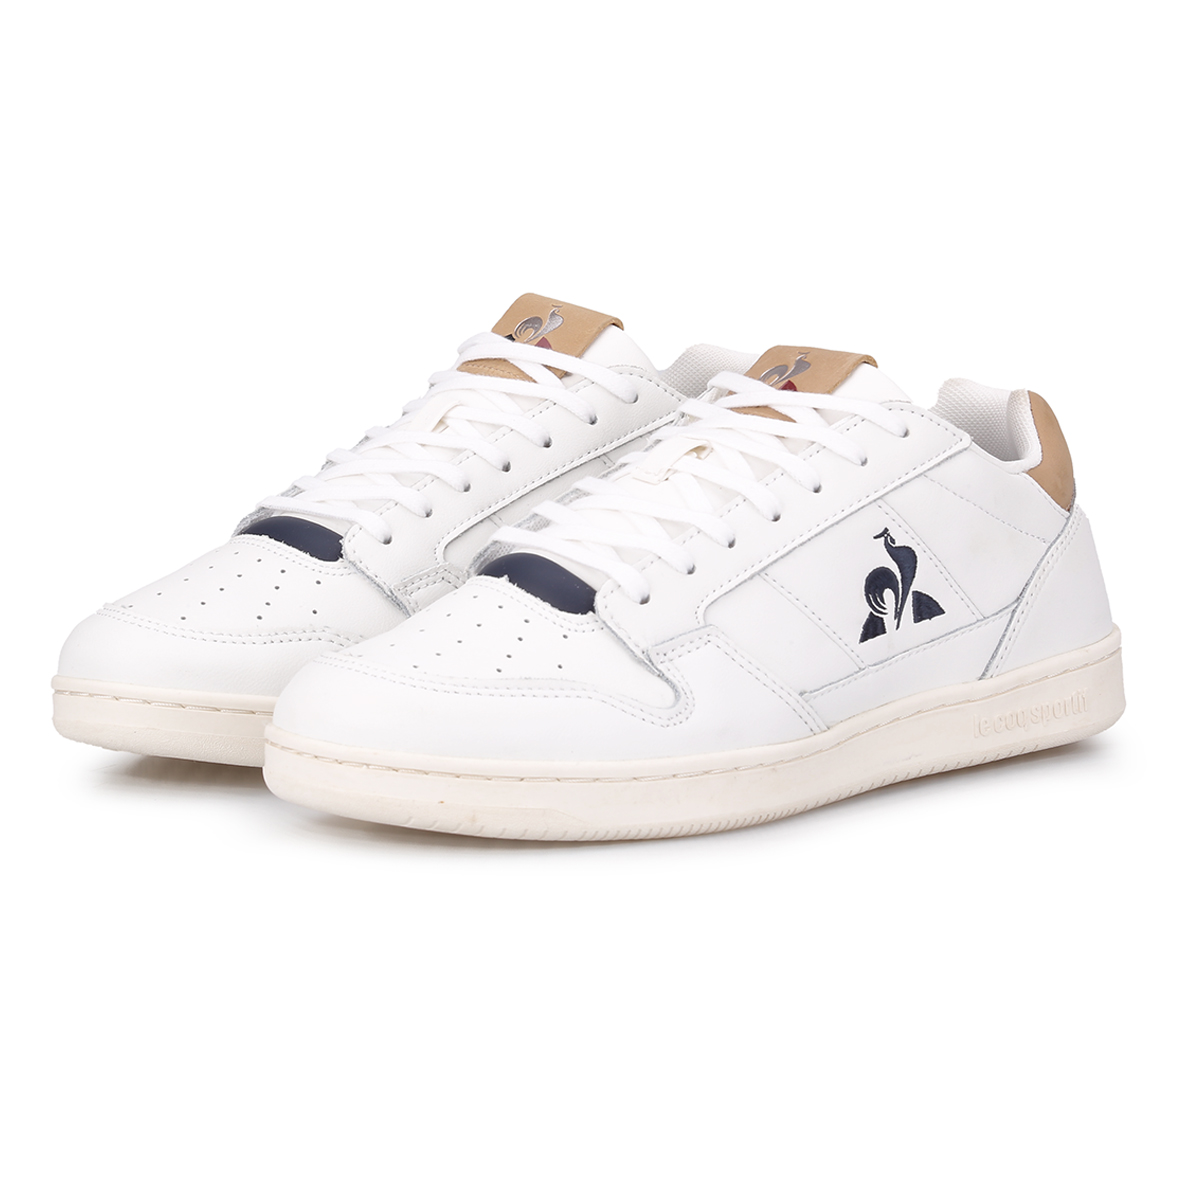 Zapatillas Le Coq Sportif Breackpoint Bbr Premium,  image number null